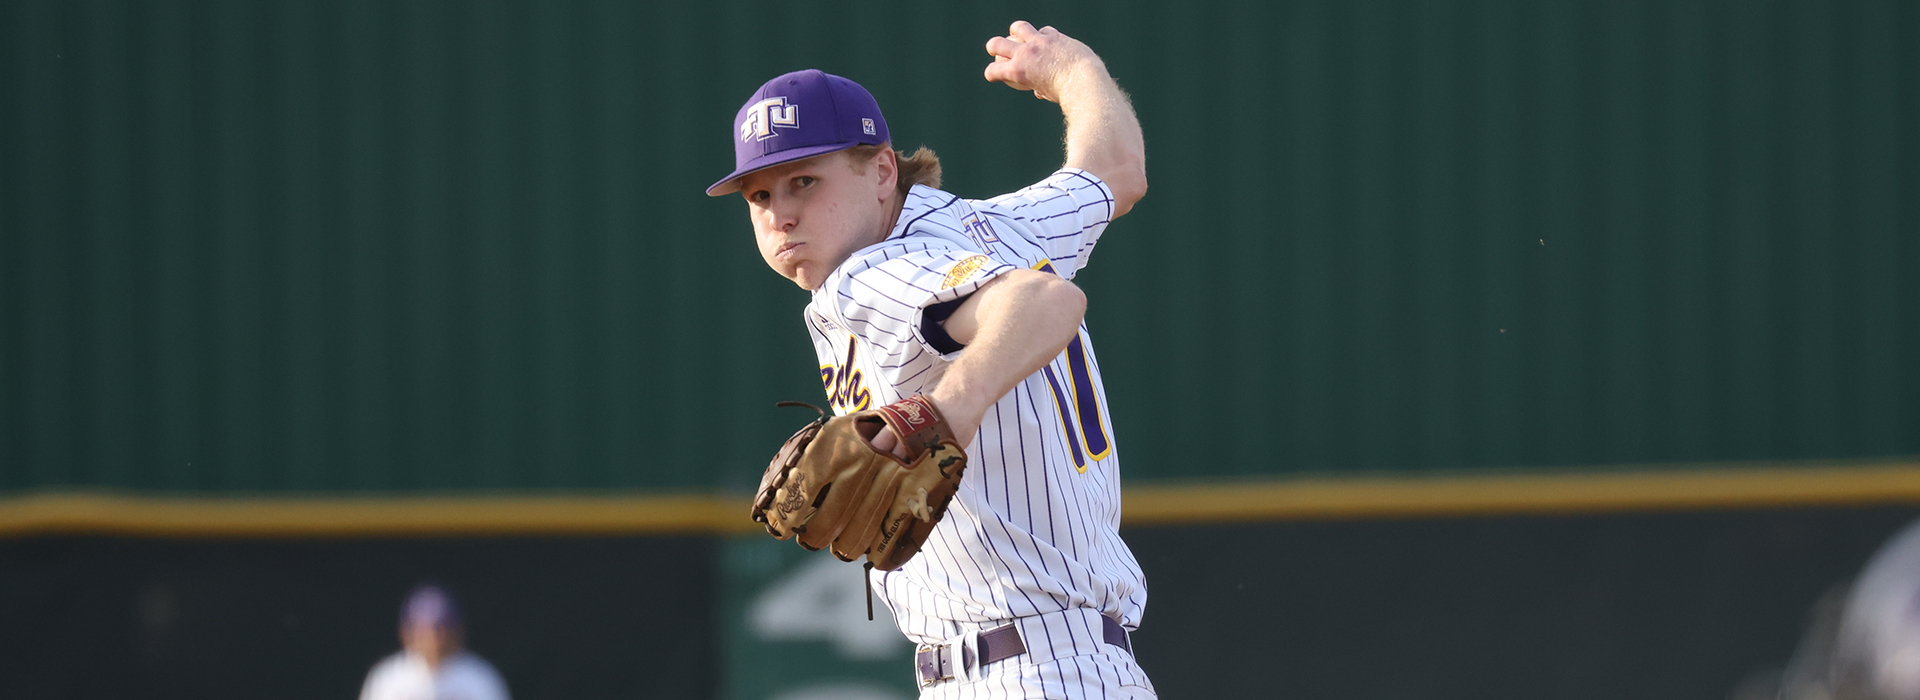 Calitri's complete-game gem lifts Tech past ETSU in 10-inning thriller